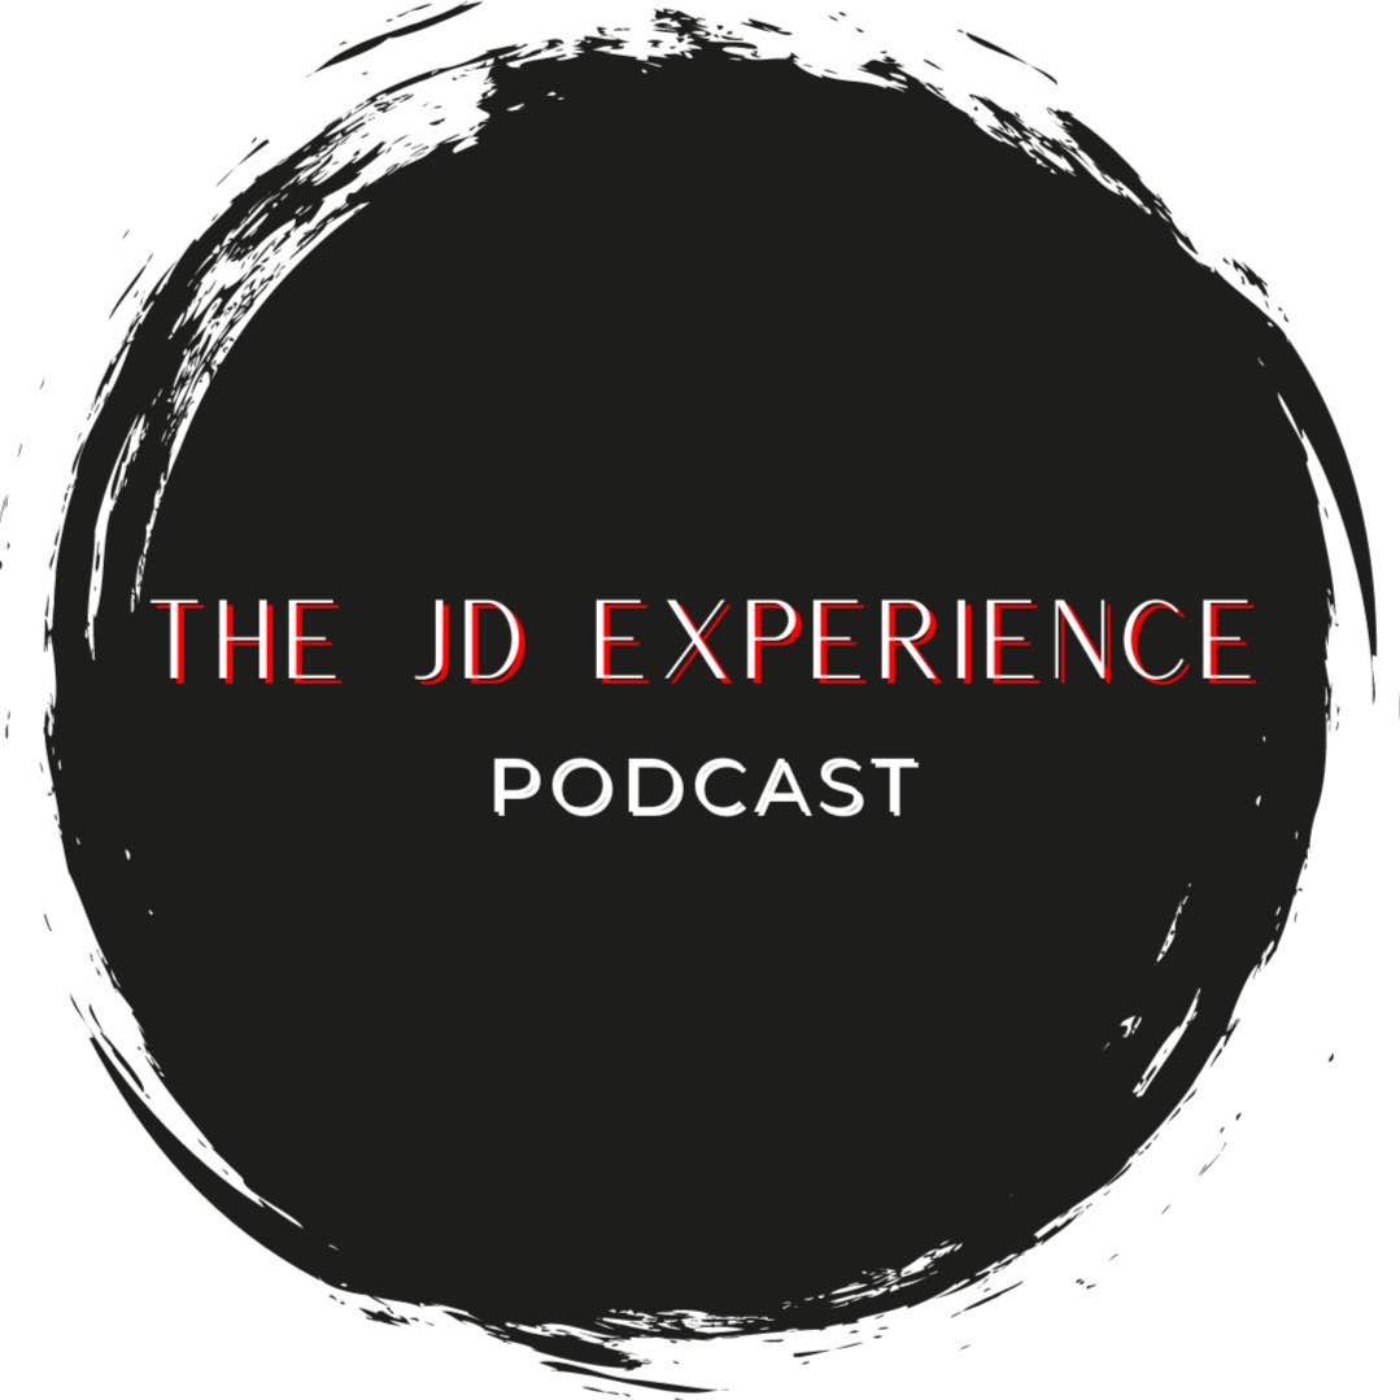 THE JD EXPERIENCE PODCAST EPISODE 10!!